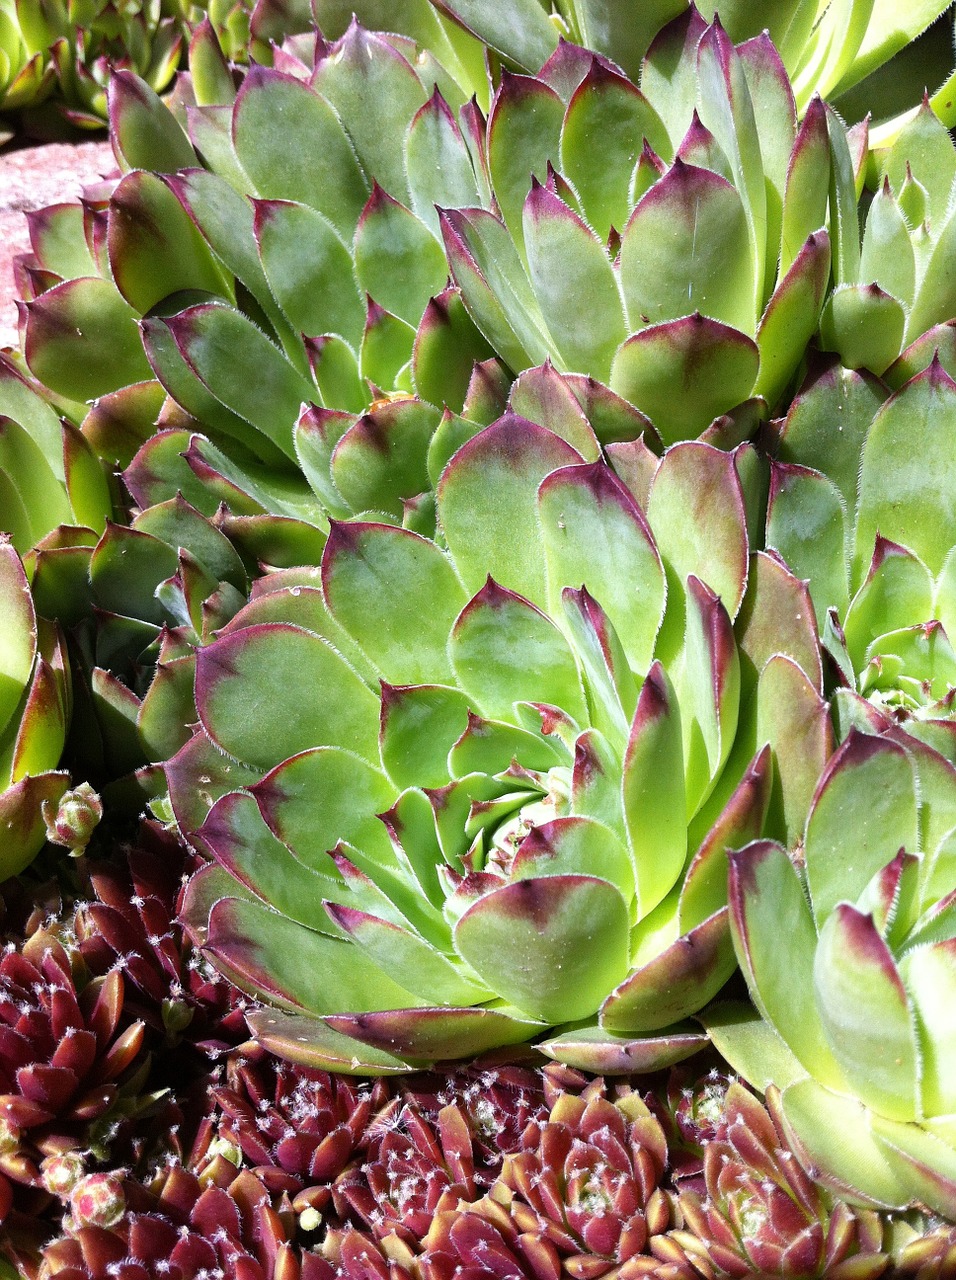 hens and chicks succulent nature free photo